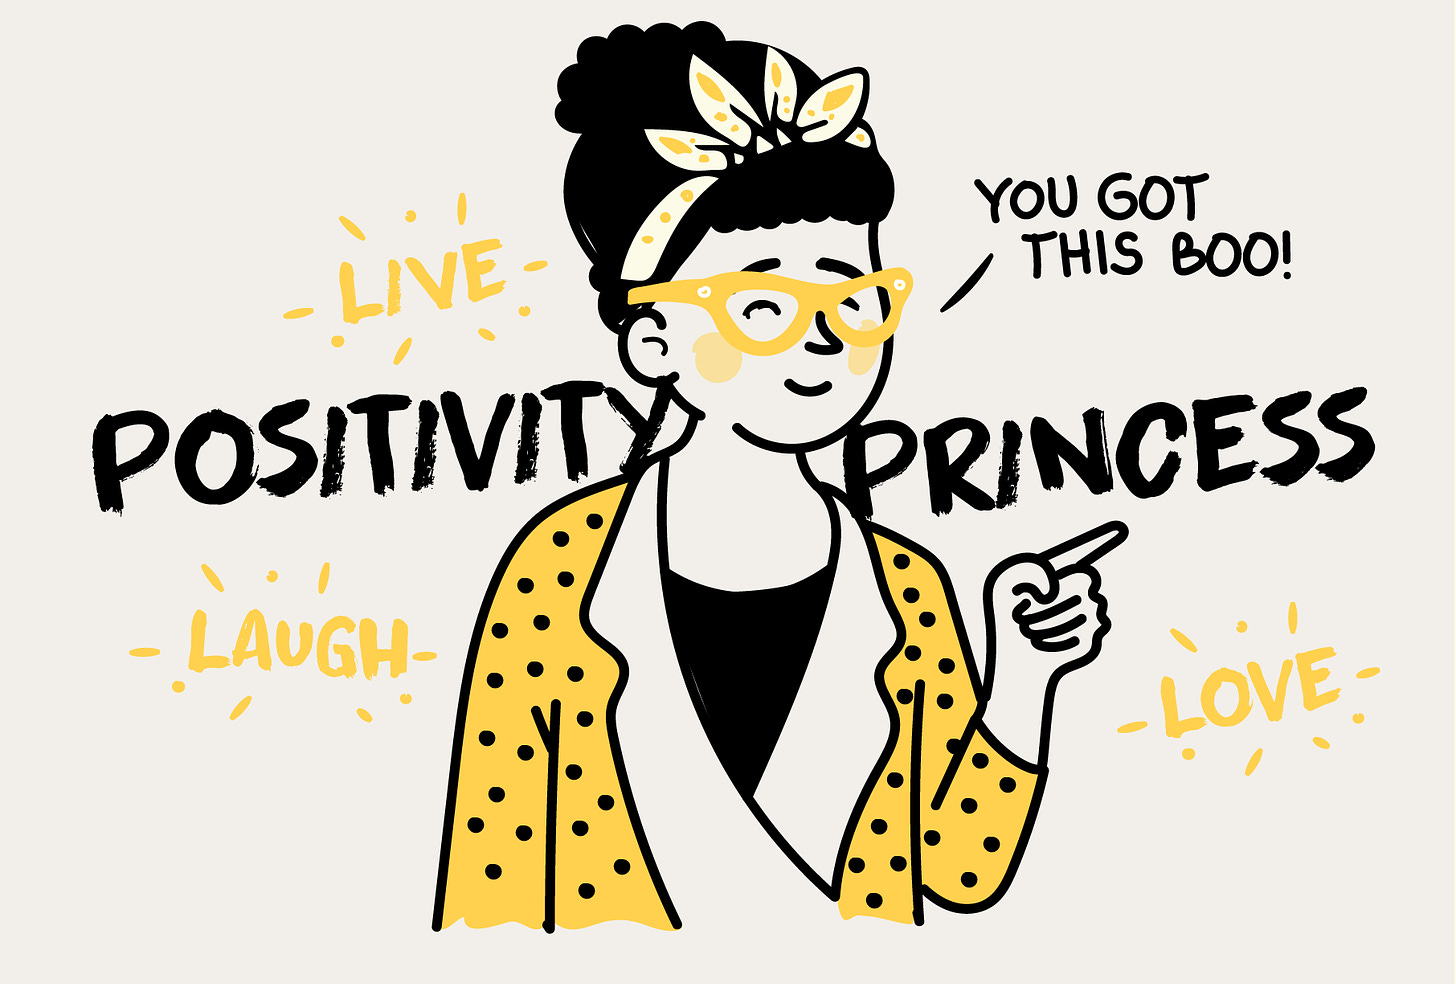 Illustration of a self-love guru who is promoting positivity 